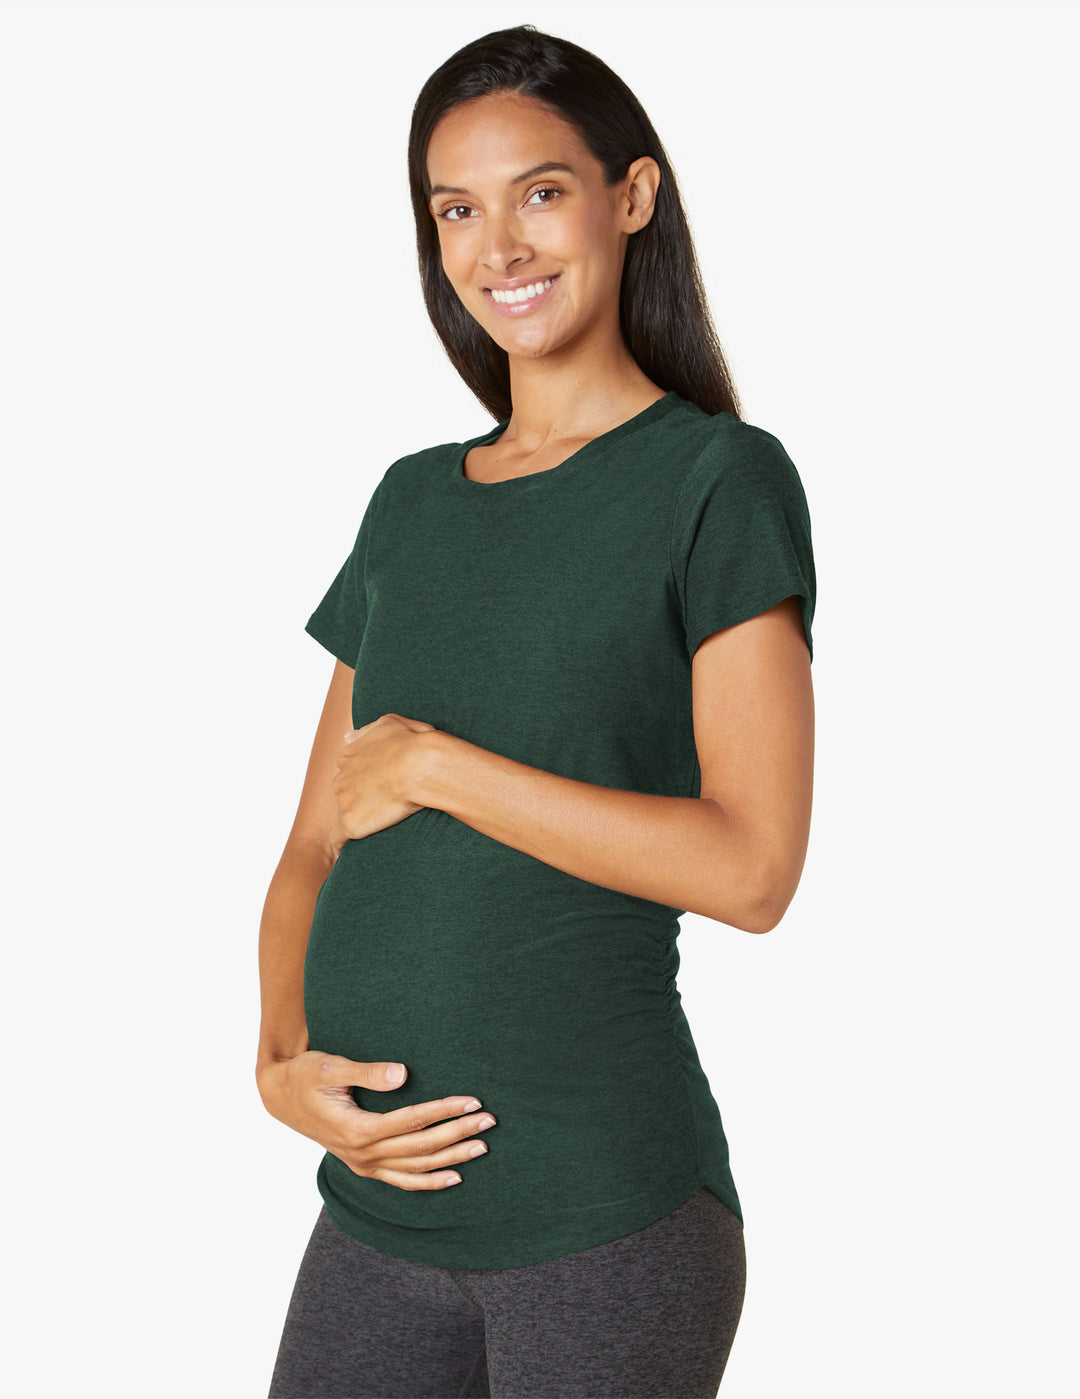 Blanqi Active Maternity Pocket Leggings - Olive Green – Mums and Bumps